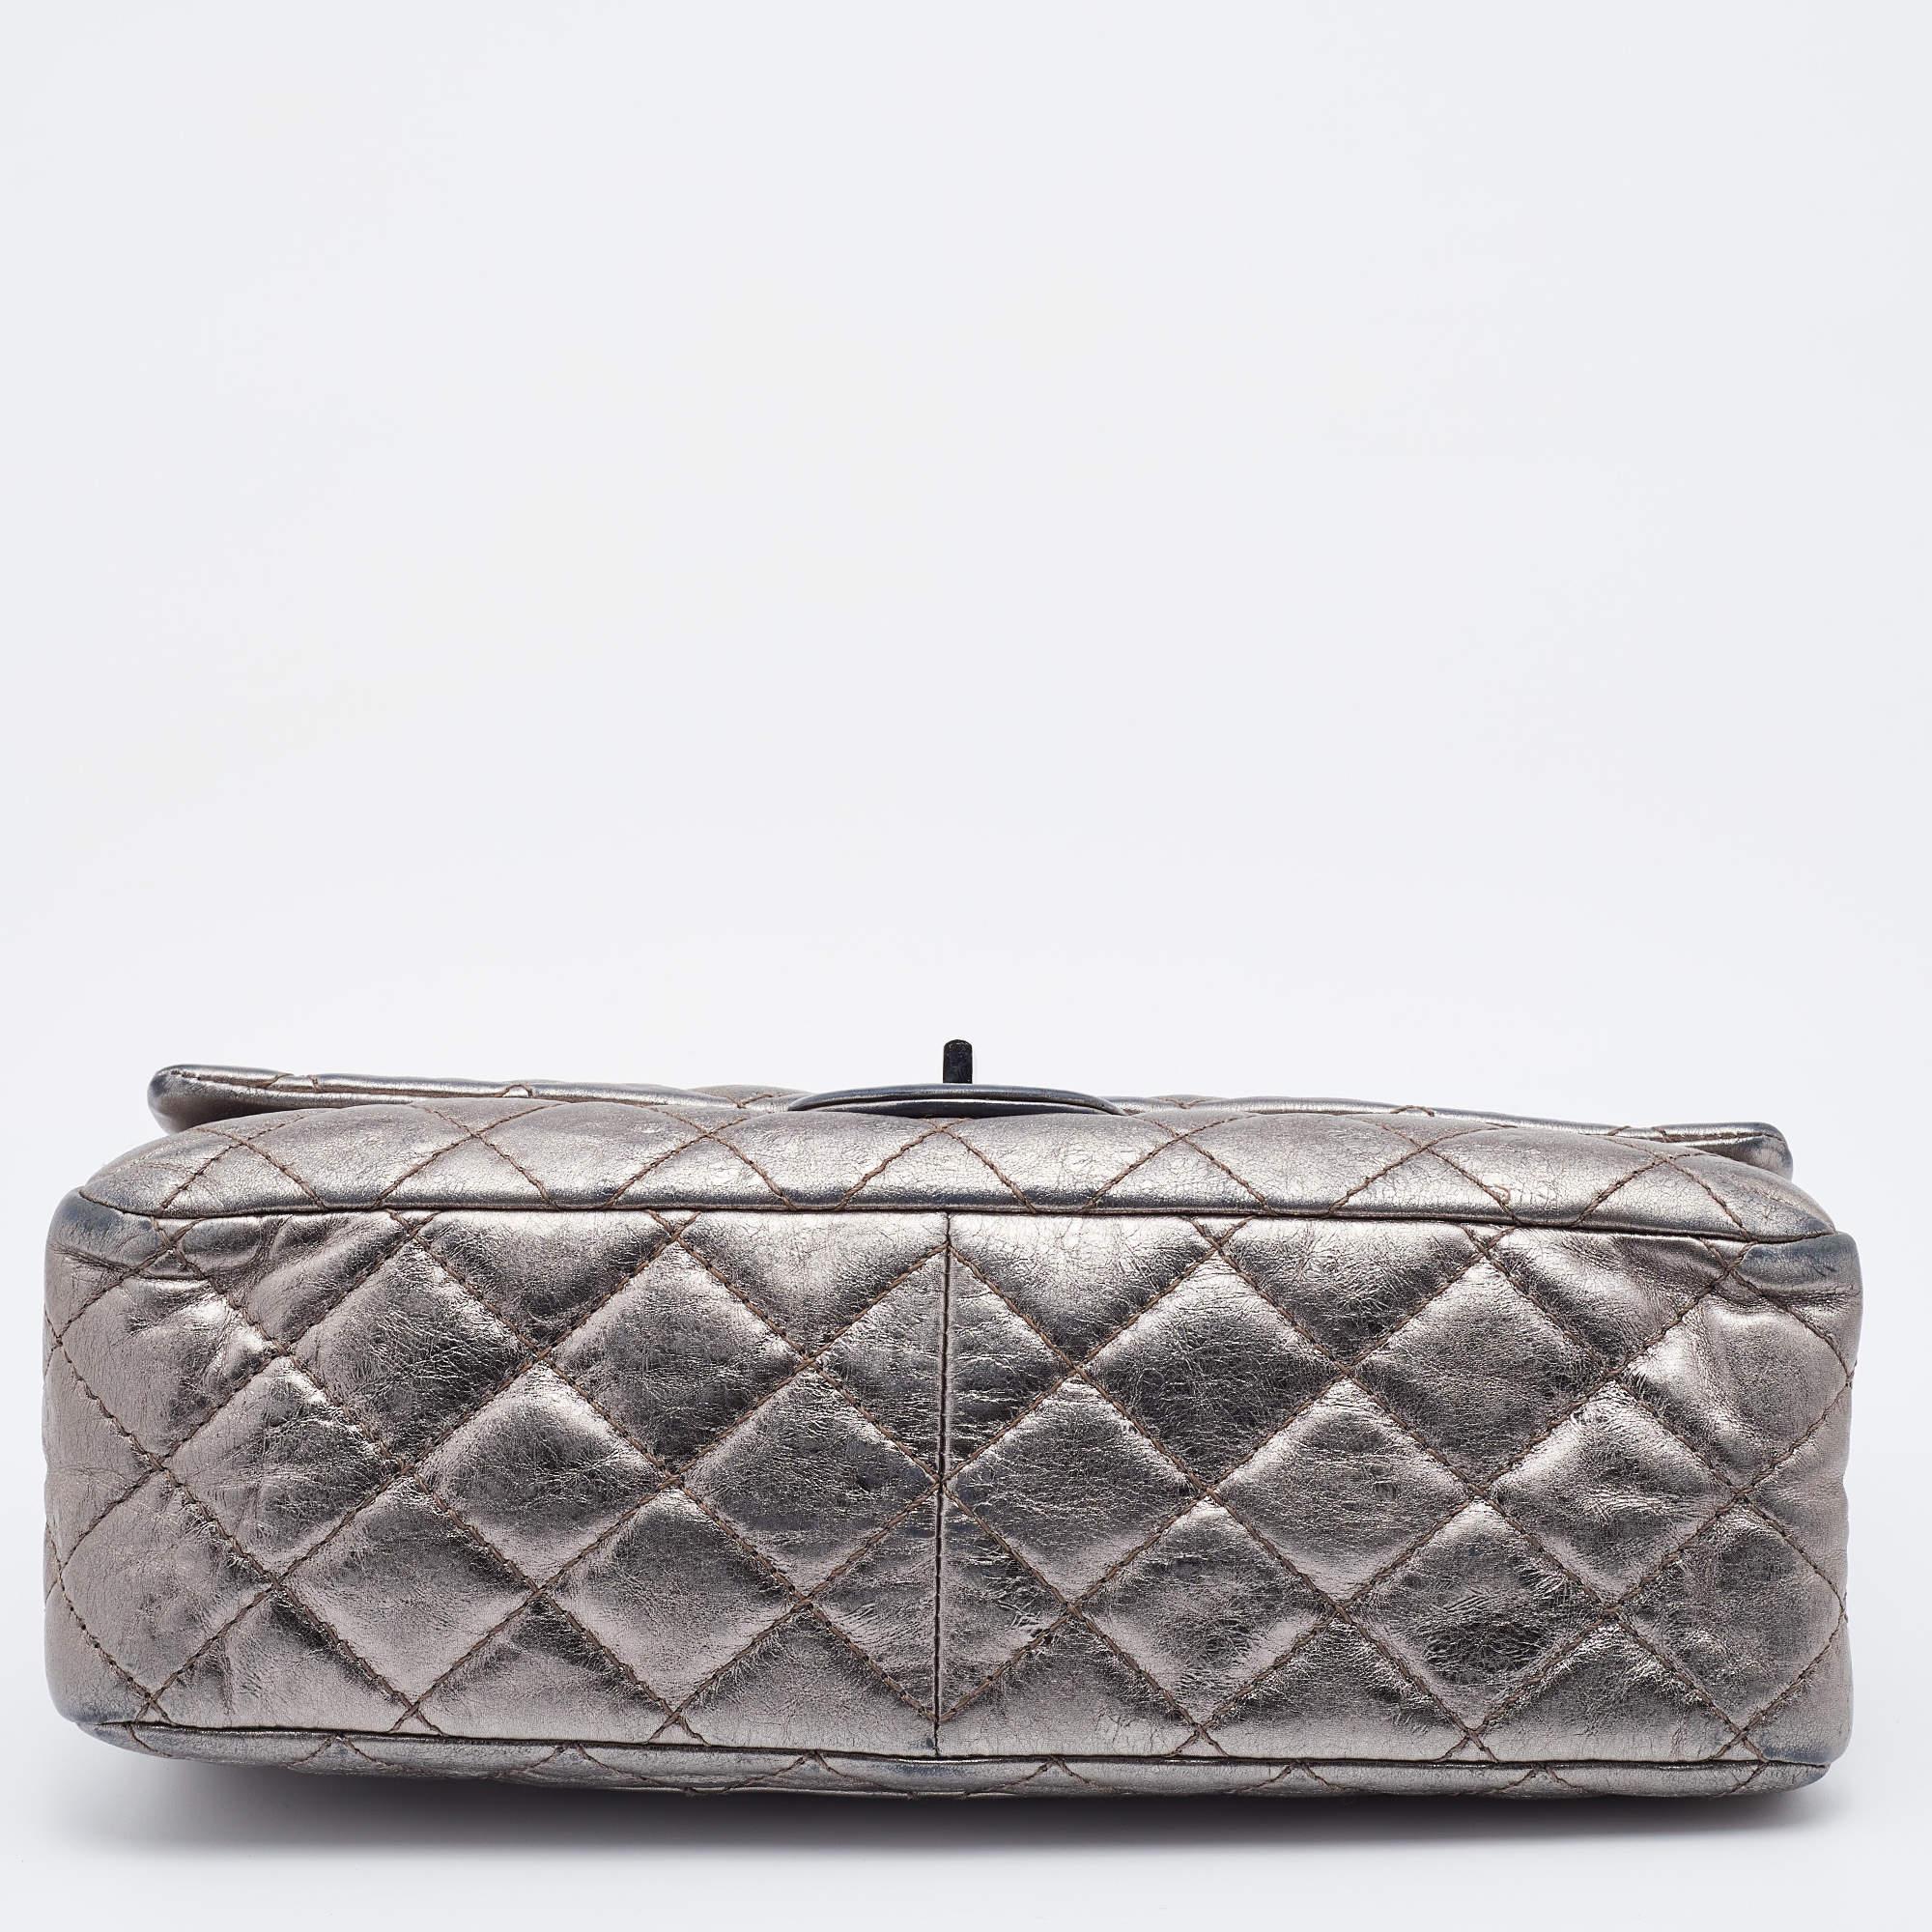 Women's Chanel Metallic Grey Quilted Leather Reissue 2.55 Classic 226 Flap Bag For Sale